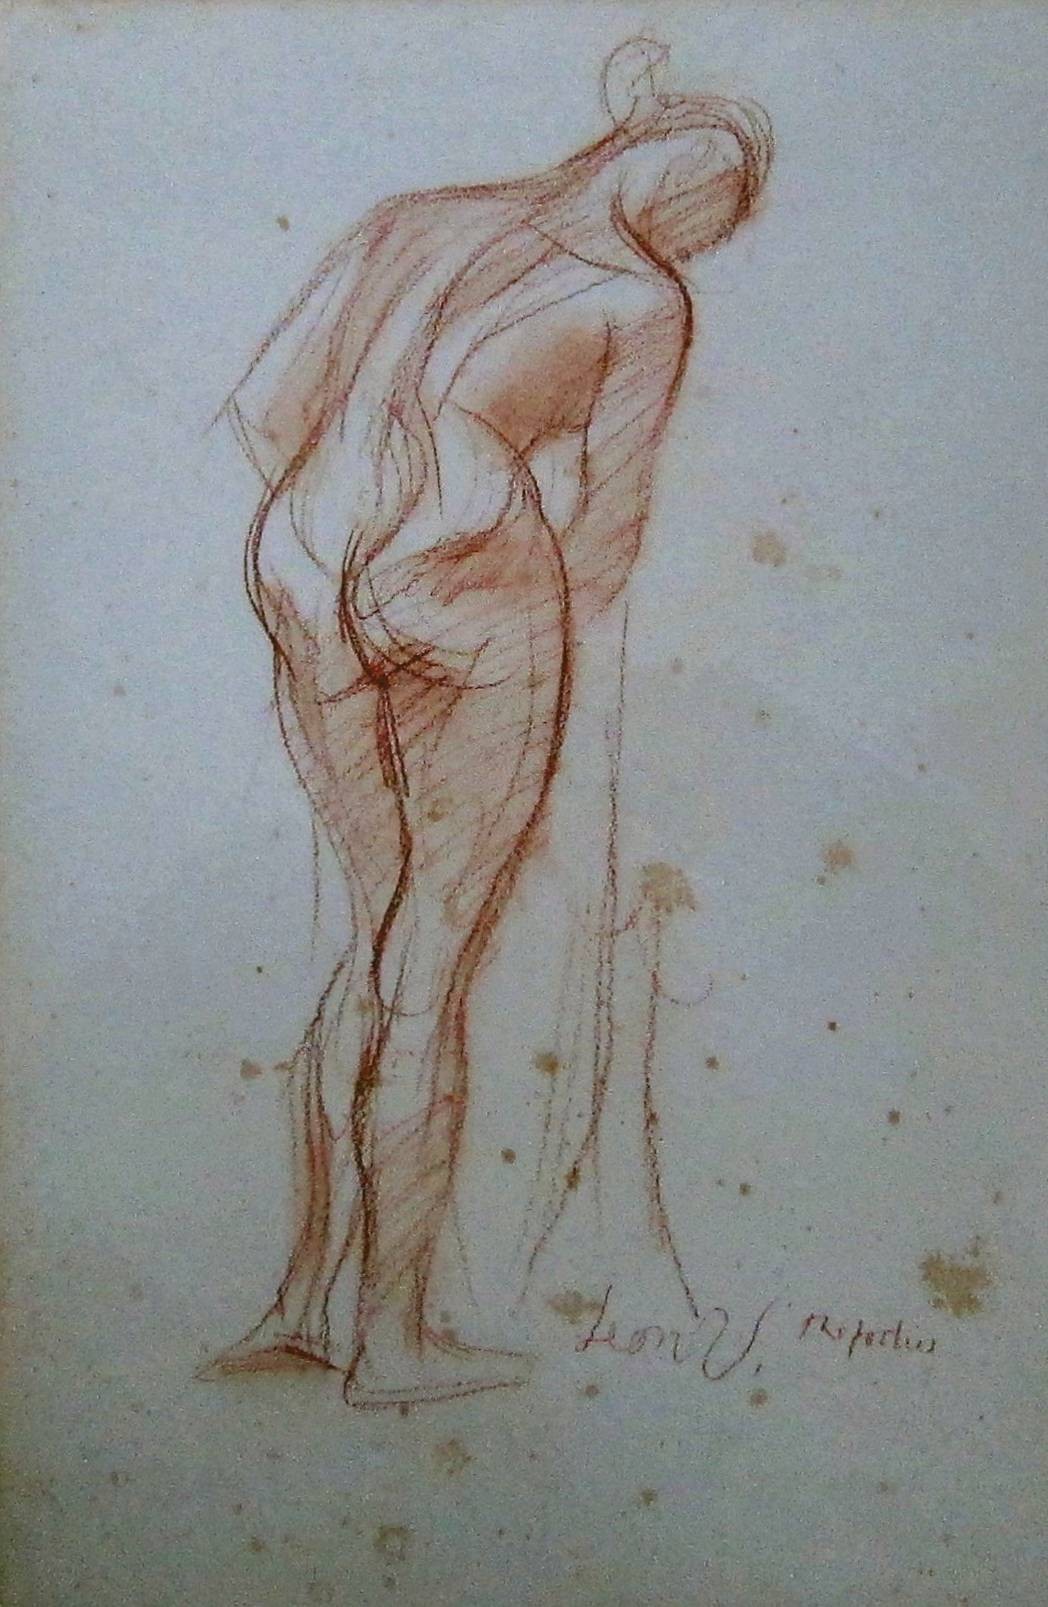 LEON UNDERWOOD [1890-1975]. Standing Nude. Conte crayon drawing. Signed, 54 x 37 cm. [condition: